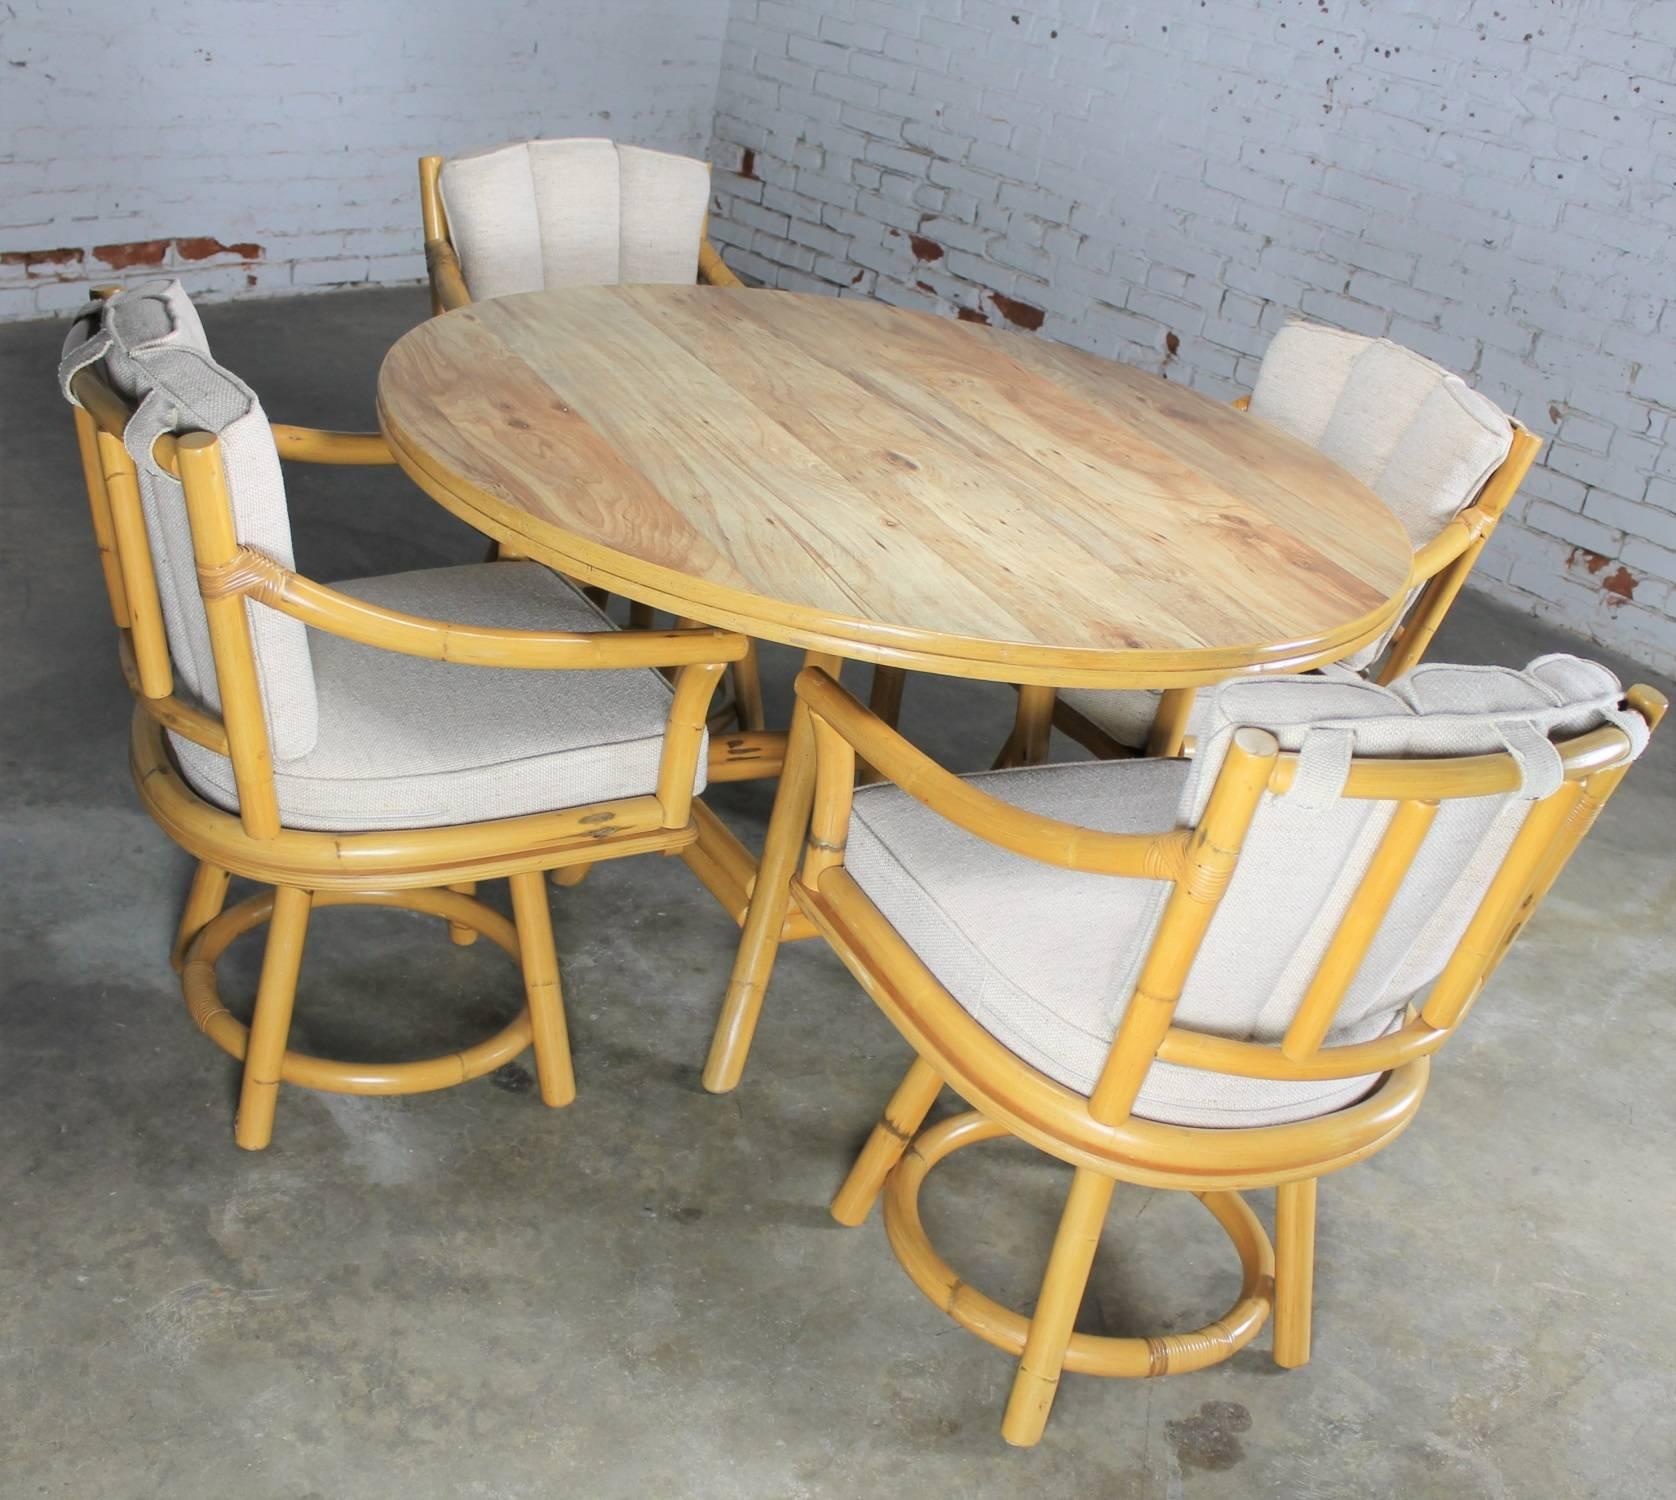 Perfect for your Florida room, a Mid-Century Ficks Reed Co. round game table of rattan with wood grain laminate top and four swivel armchairs of rattan with oatmeal colored hopsack fabric cushions. This awesome set is in exceptional circa 1970